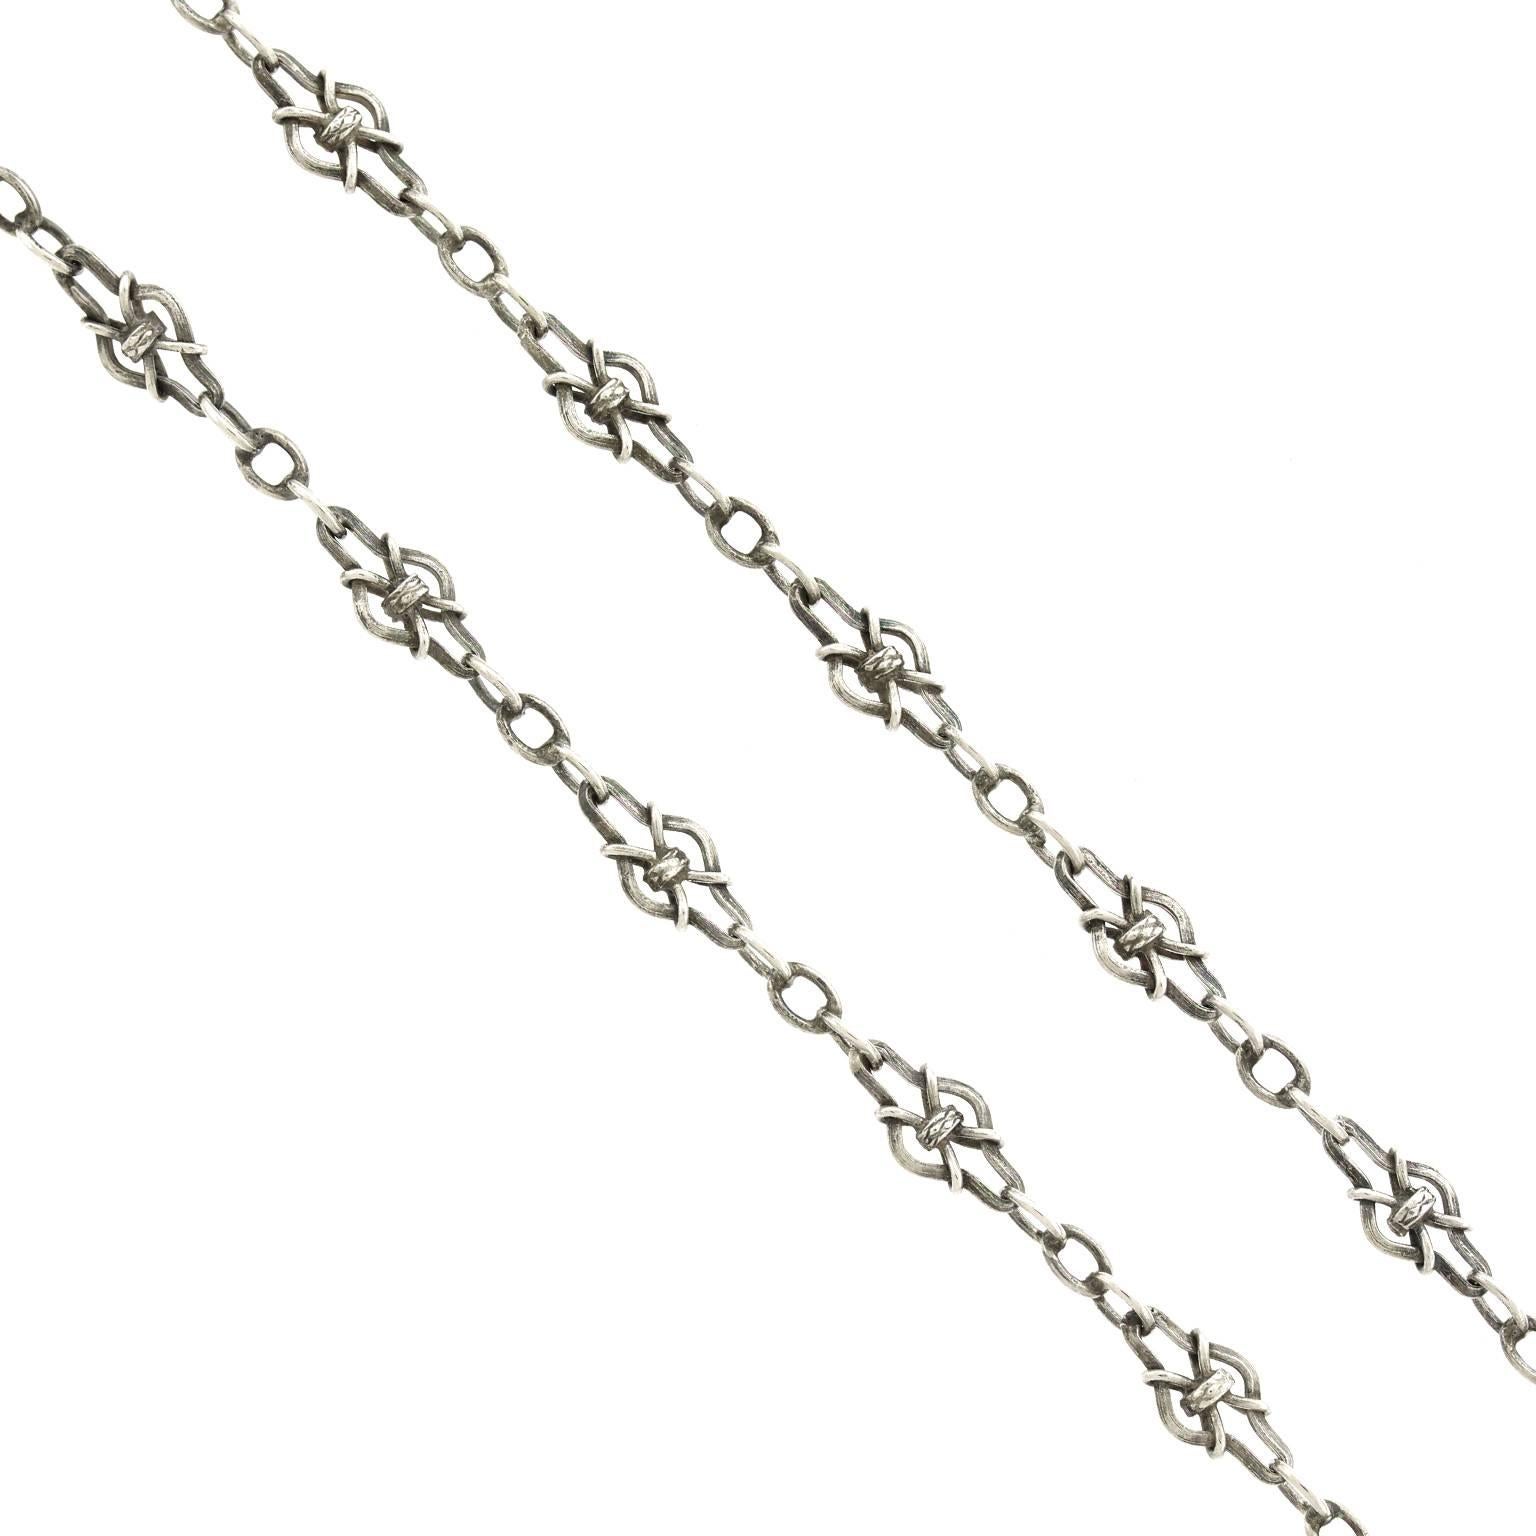 Fabulous 60-inch Long Antique French Sterling Filigree Necklace 2